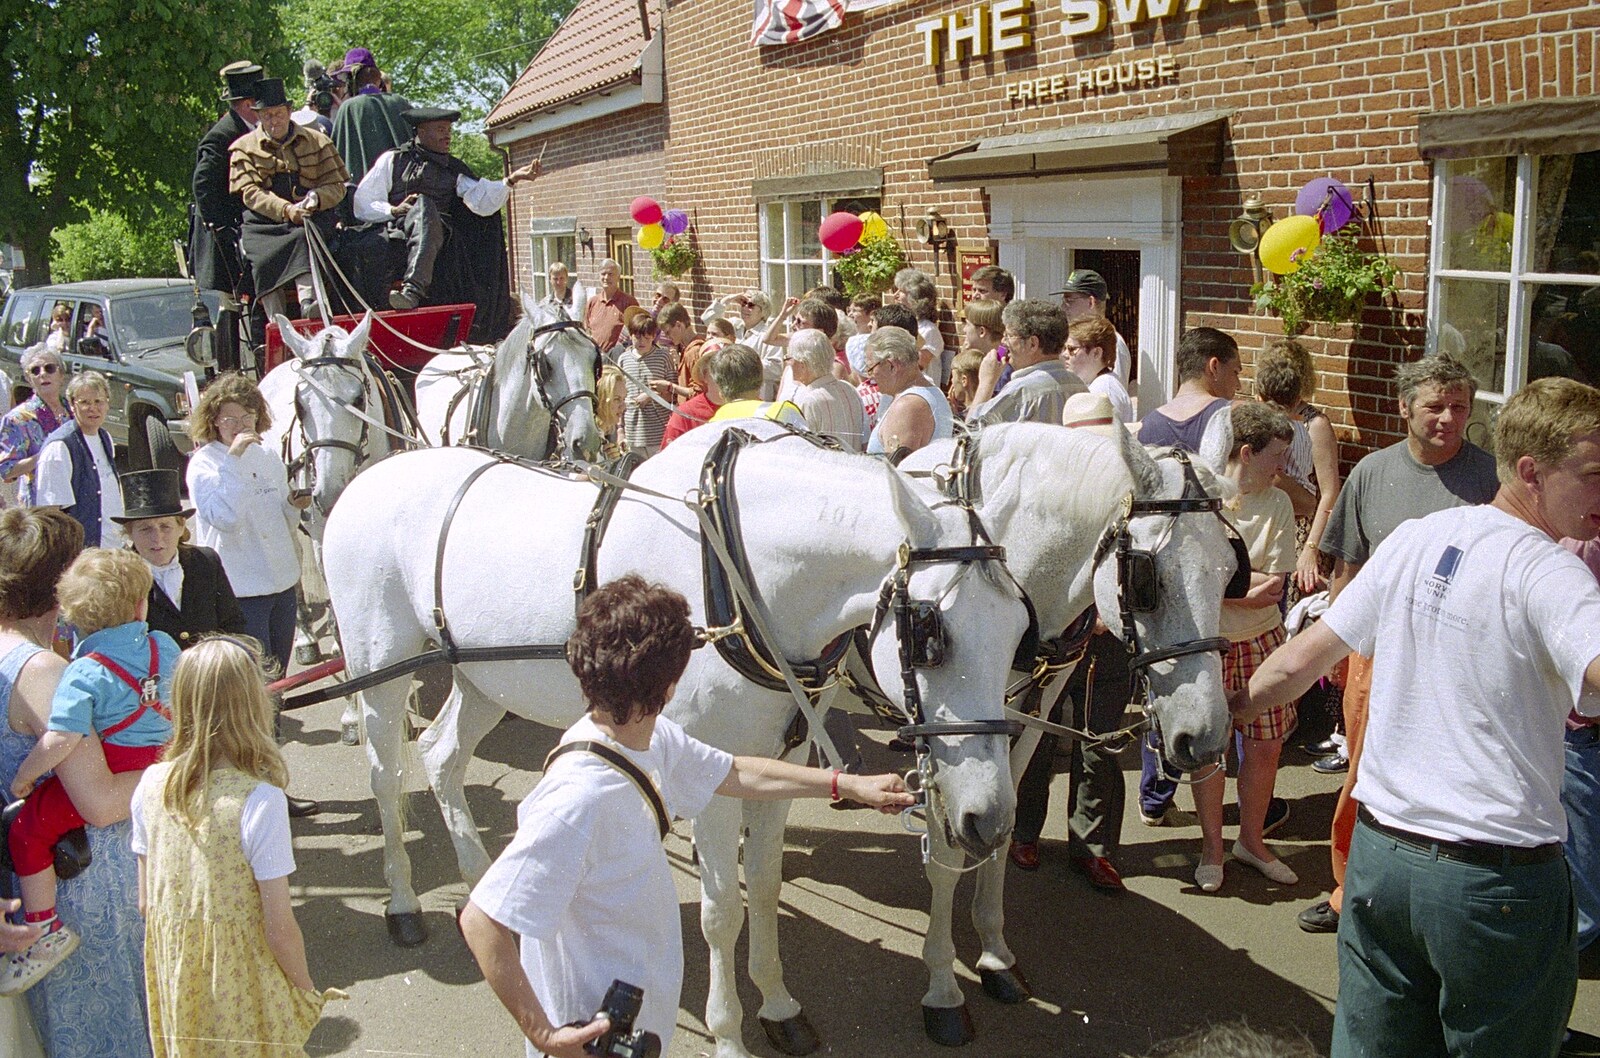 The coach sets off from The Norwich Union Mail Coach Run, The Swan Inn, Brome - 15th June 1996